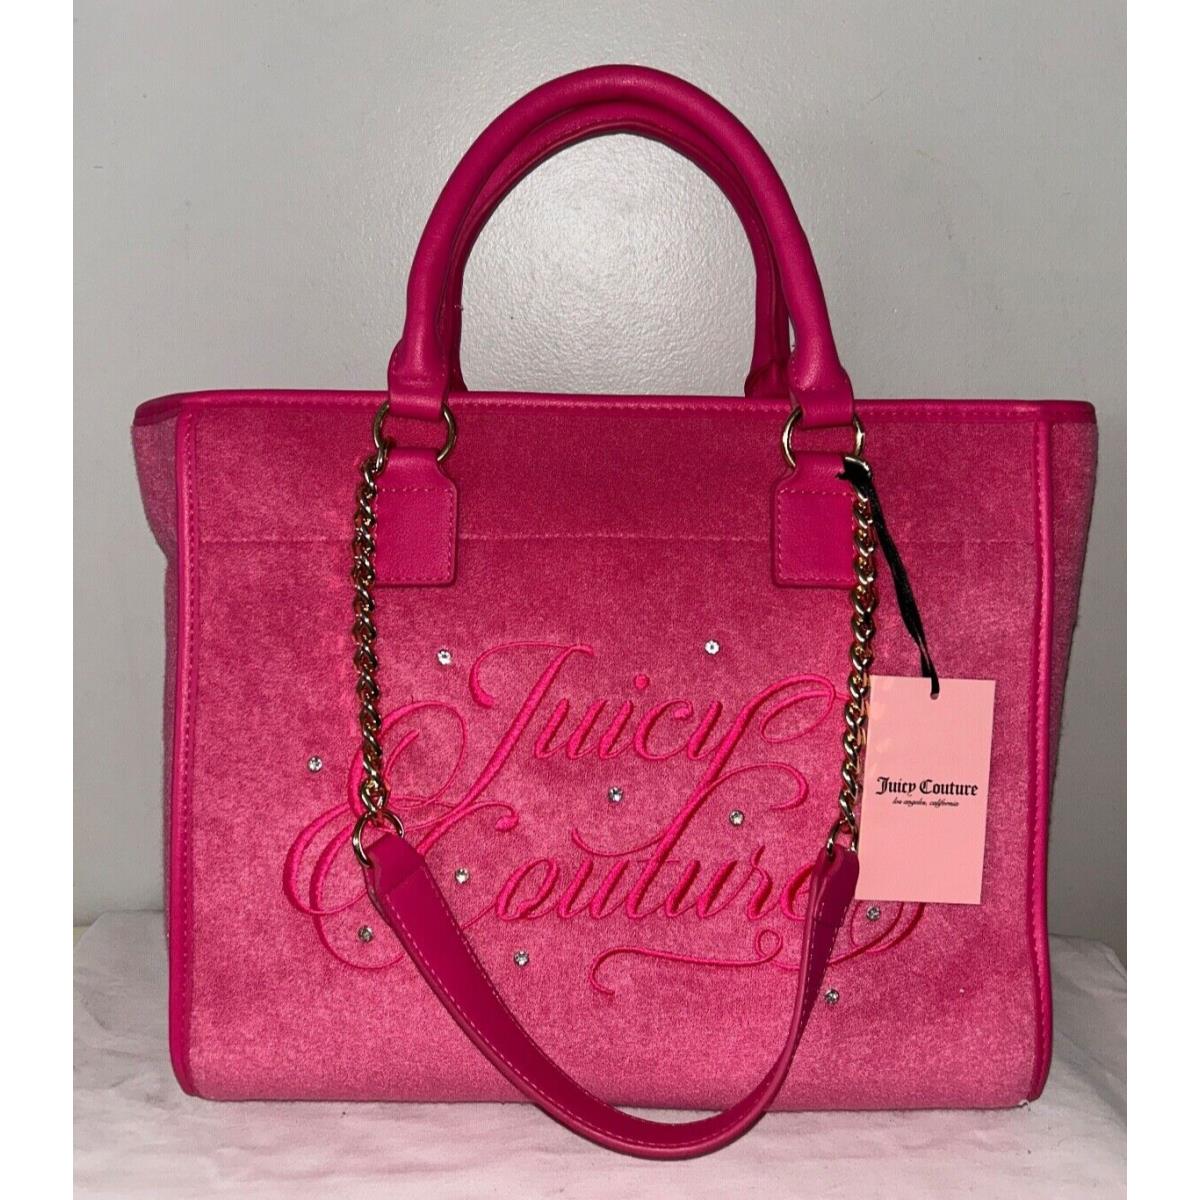 Juicy Couture Velour Juicy Beach Couture Tote in Hot Pink Flash